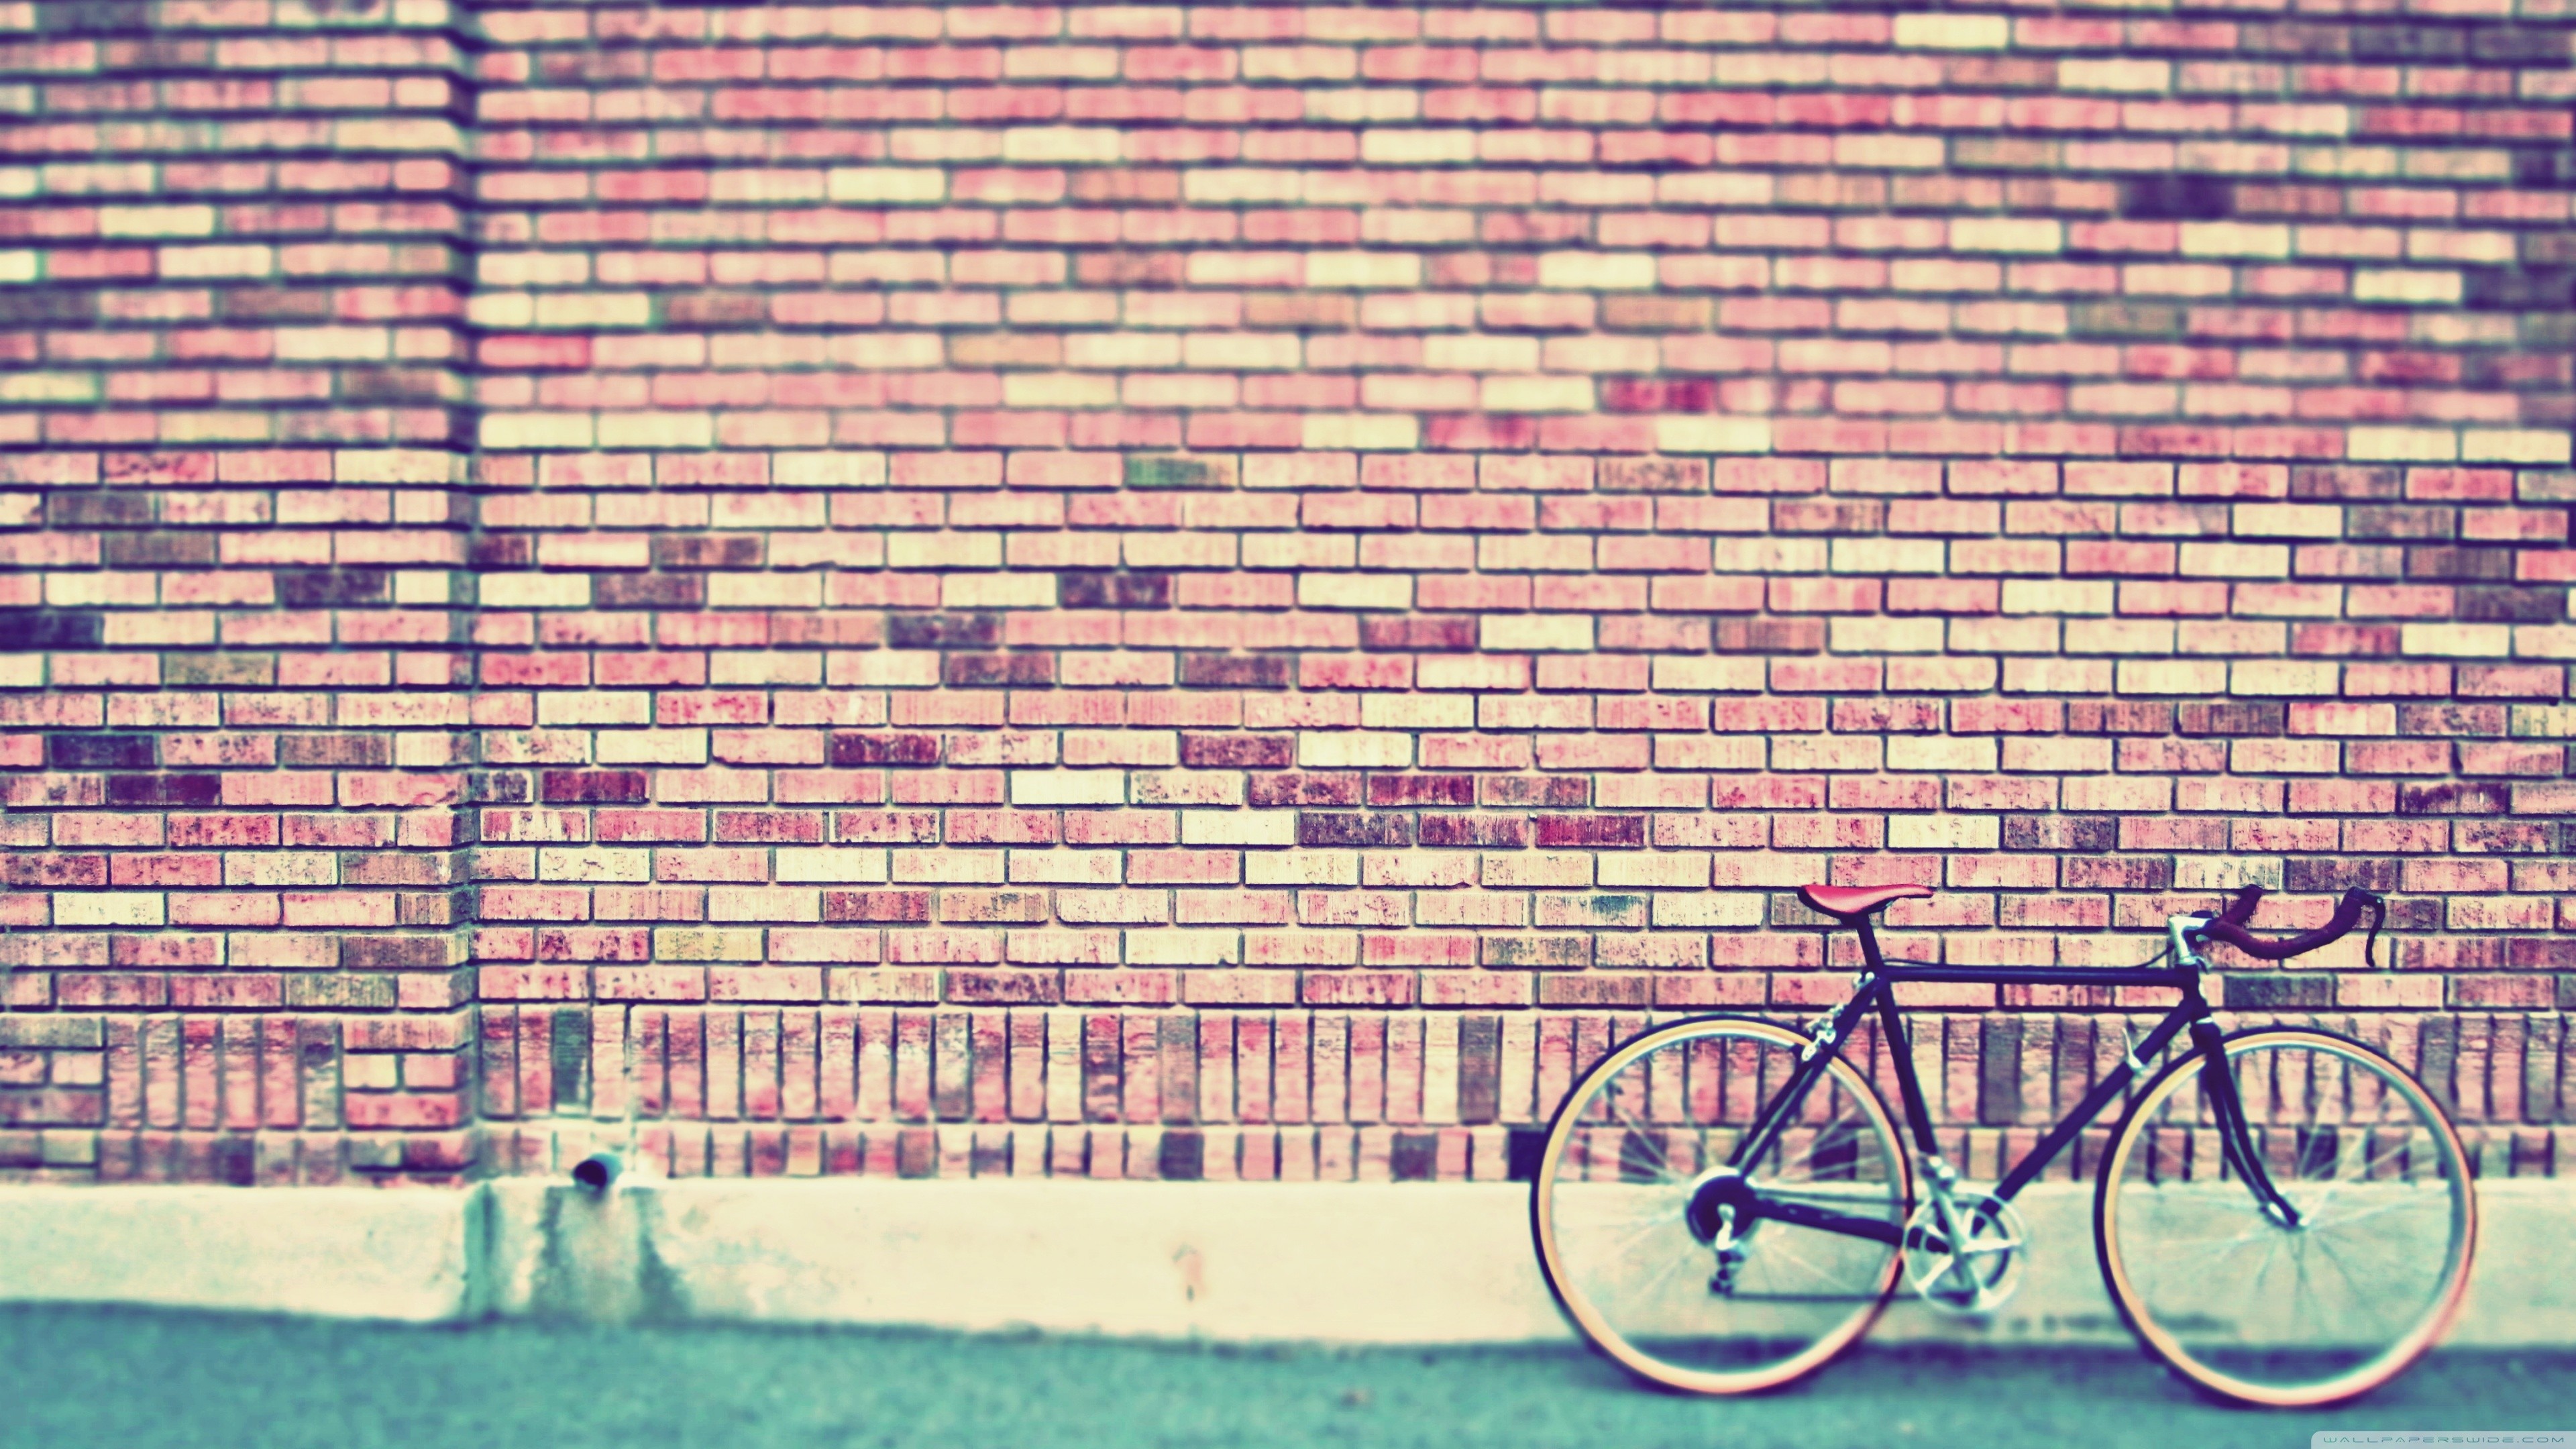 tumblr-hipster-wallpapers-hipster-wallpapers-tumblr-bicycle-fixie.jpg